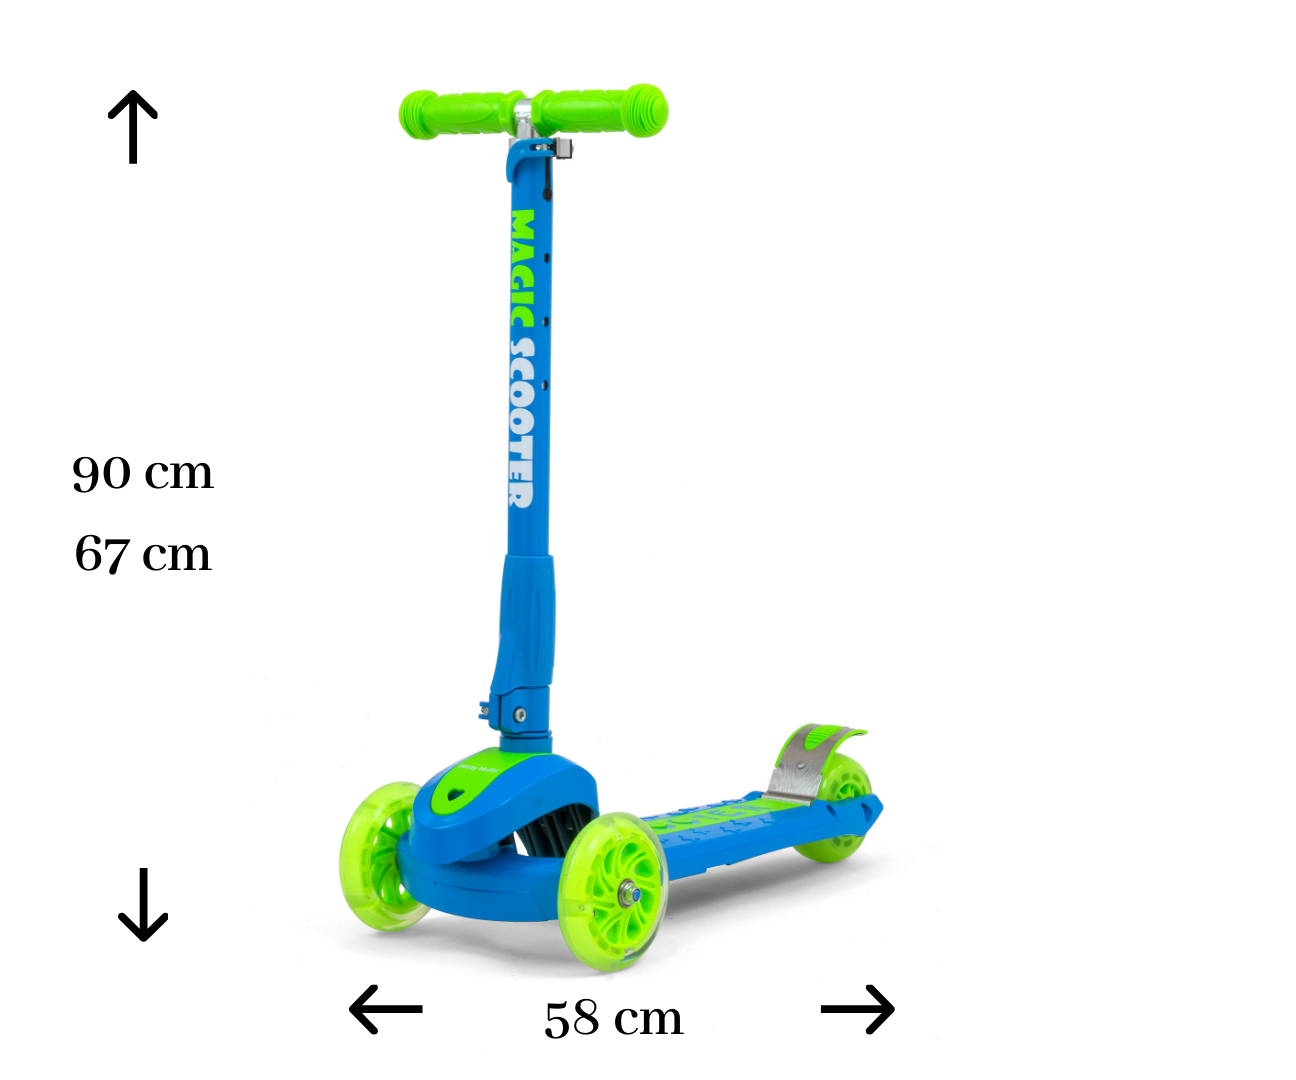 Milly Mally Scooter Magic Blue-Green Milly Mally Scooter Magic Blue-Green